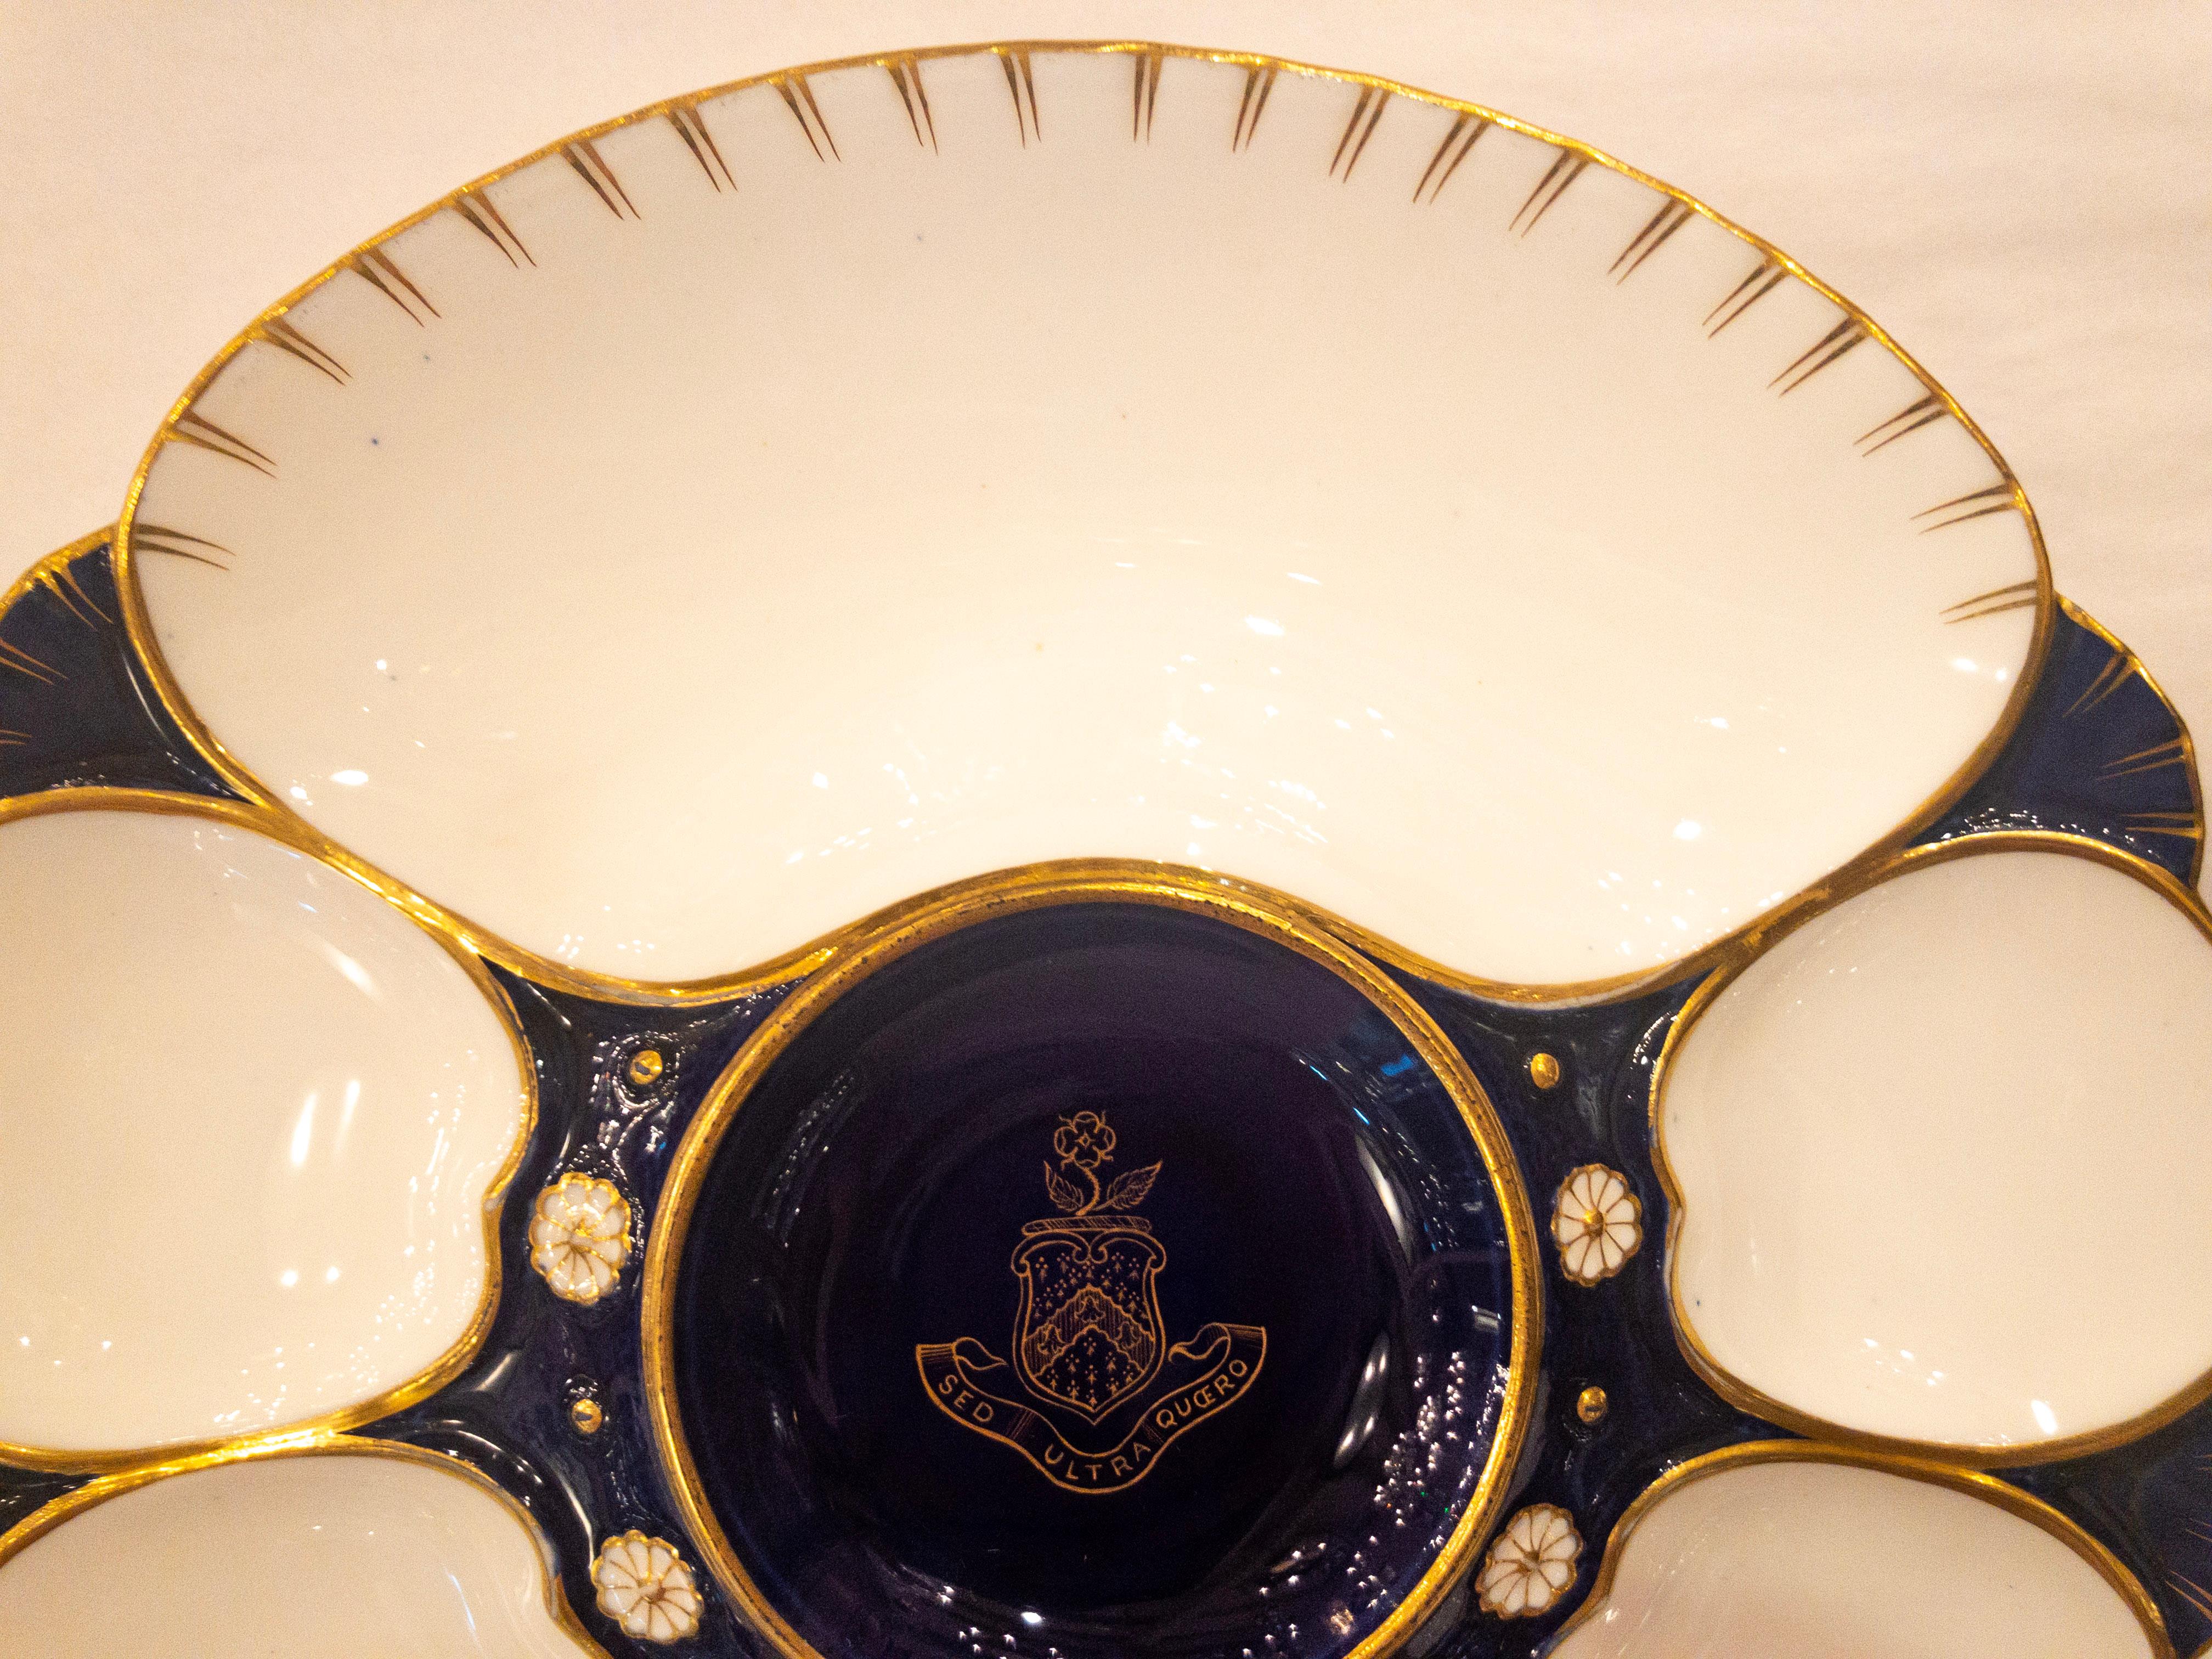 Early 20th Century Rare Antique English Minton Oyster Plate with Latin Crest and Large Cracker Well